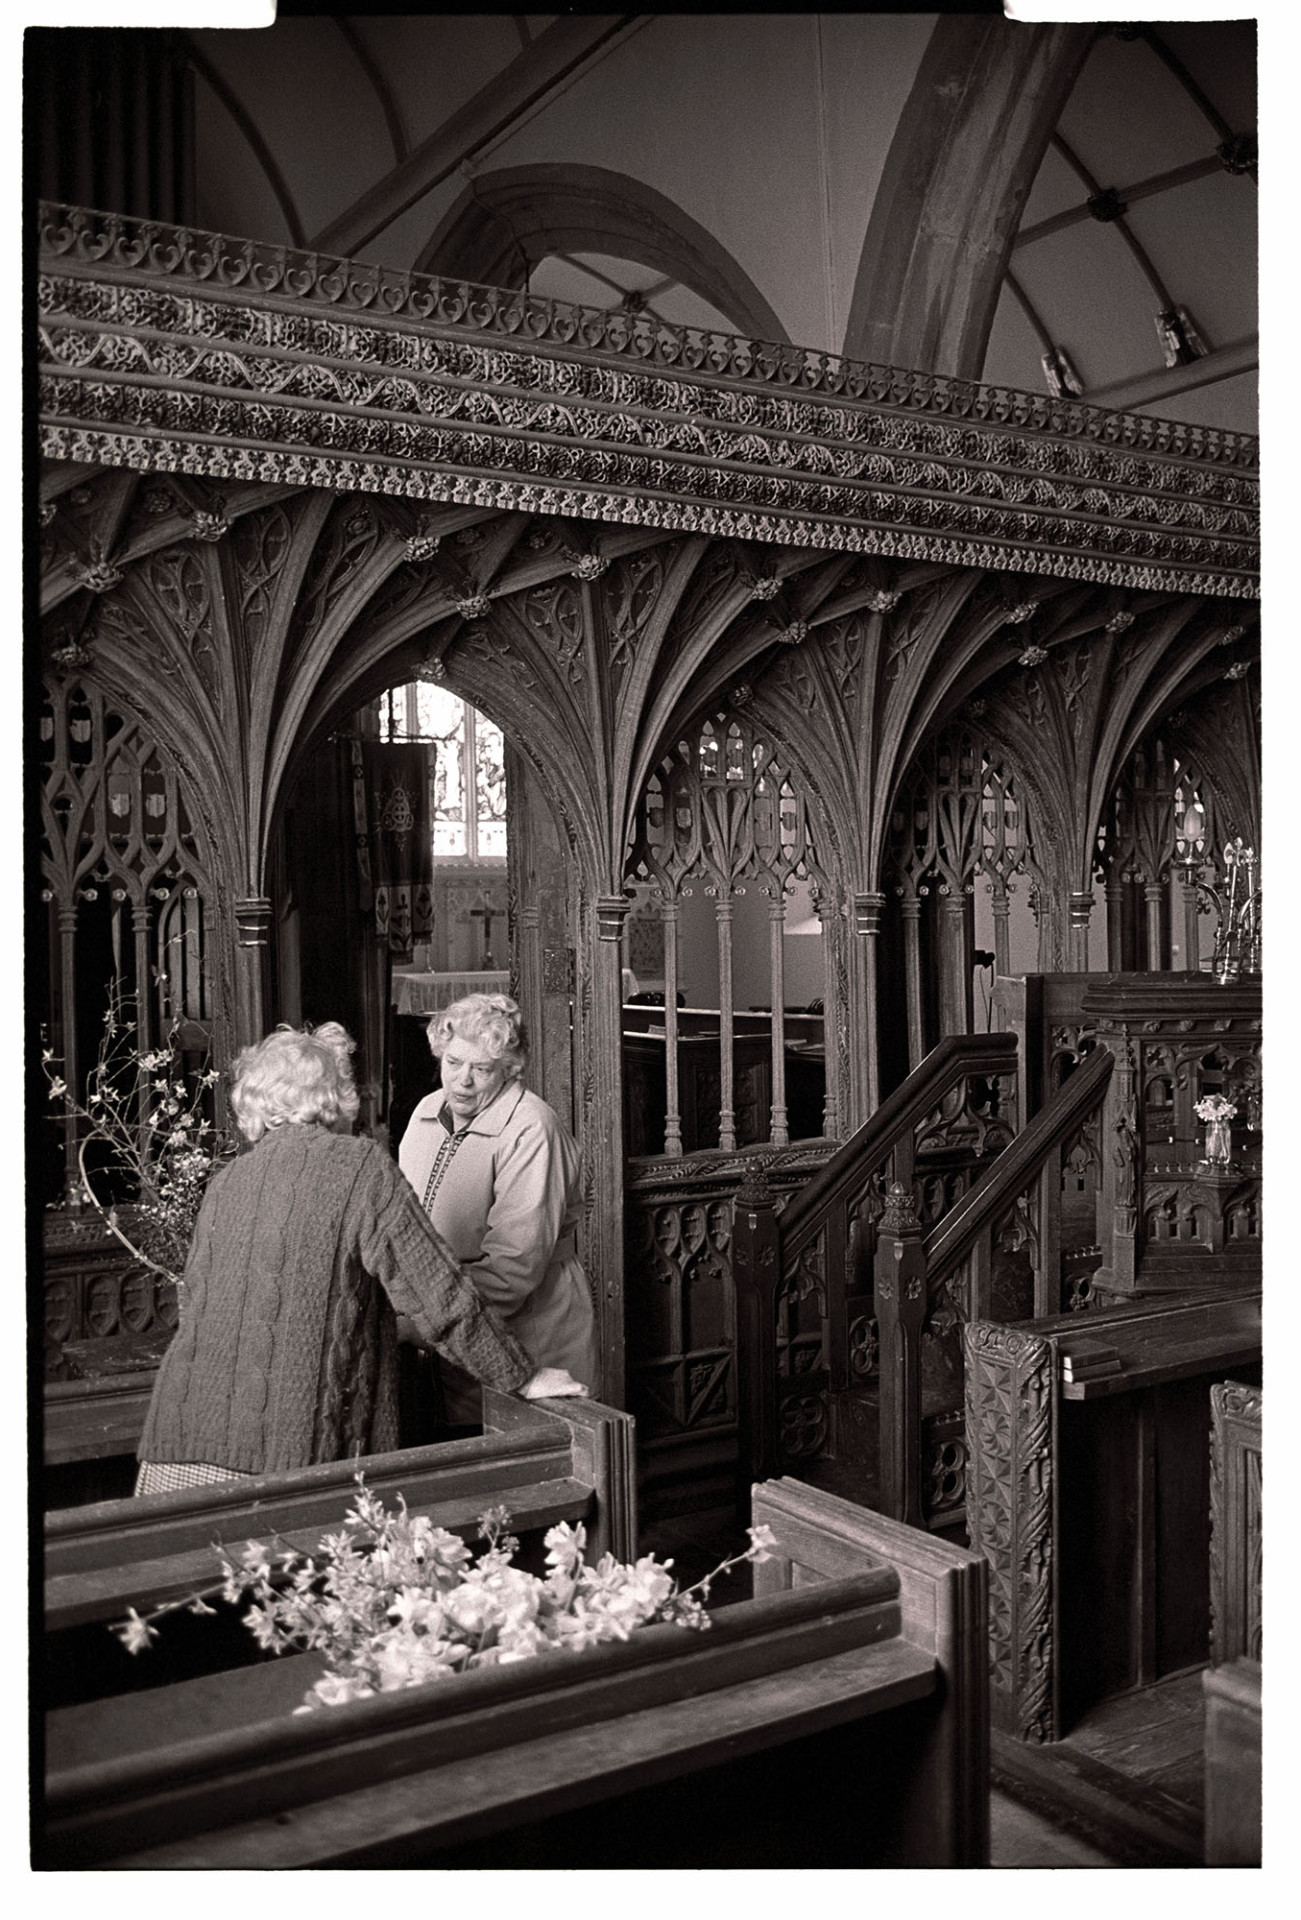 Easter flowers in church, women chatting and arranging. Fine screen. 
[Two women talking and arranging flowers in Chulmleigh Church for Easter. They are stood by the pulpit and rood screen, both of which are ornately carved.]